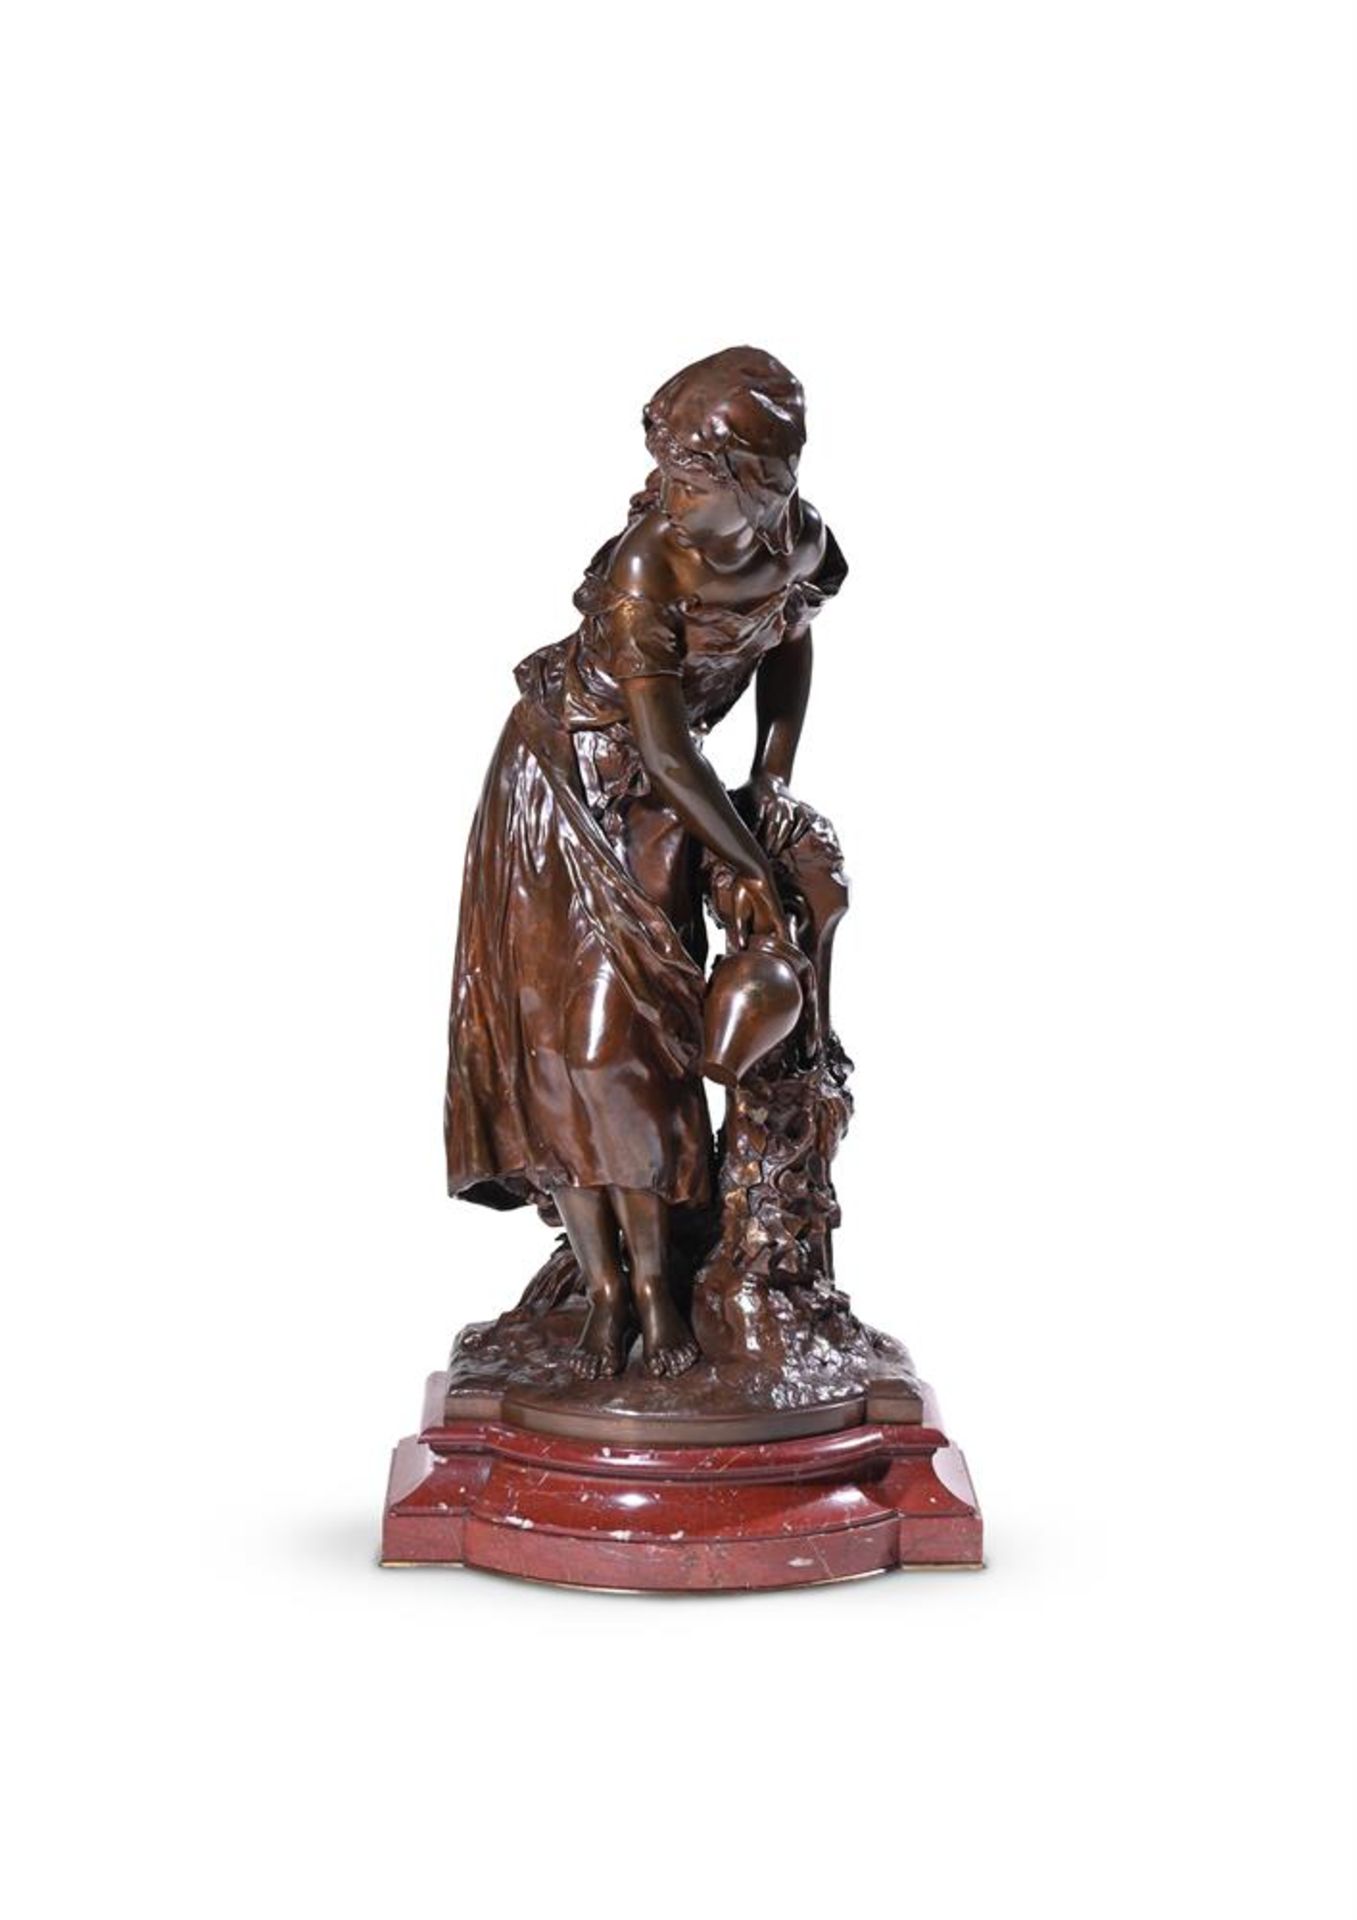 MATHURIN MOREAU (FRENCH 1822-1912), A BRONZE FIGURE OF THE WATER CARRIER, LATE 19TH OR EARLY 20TH